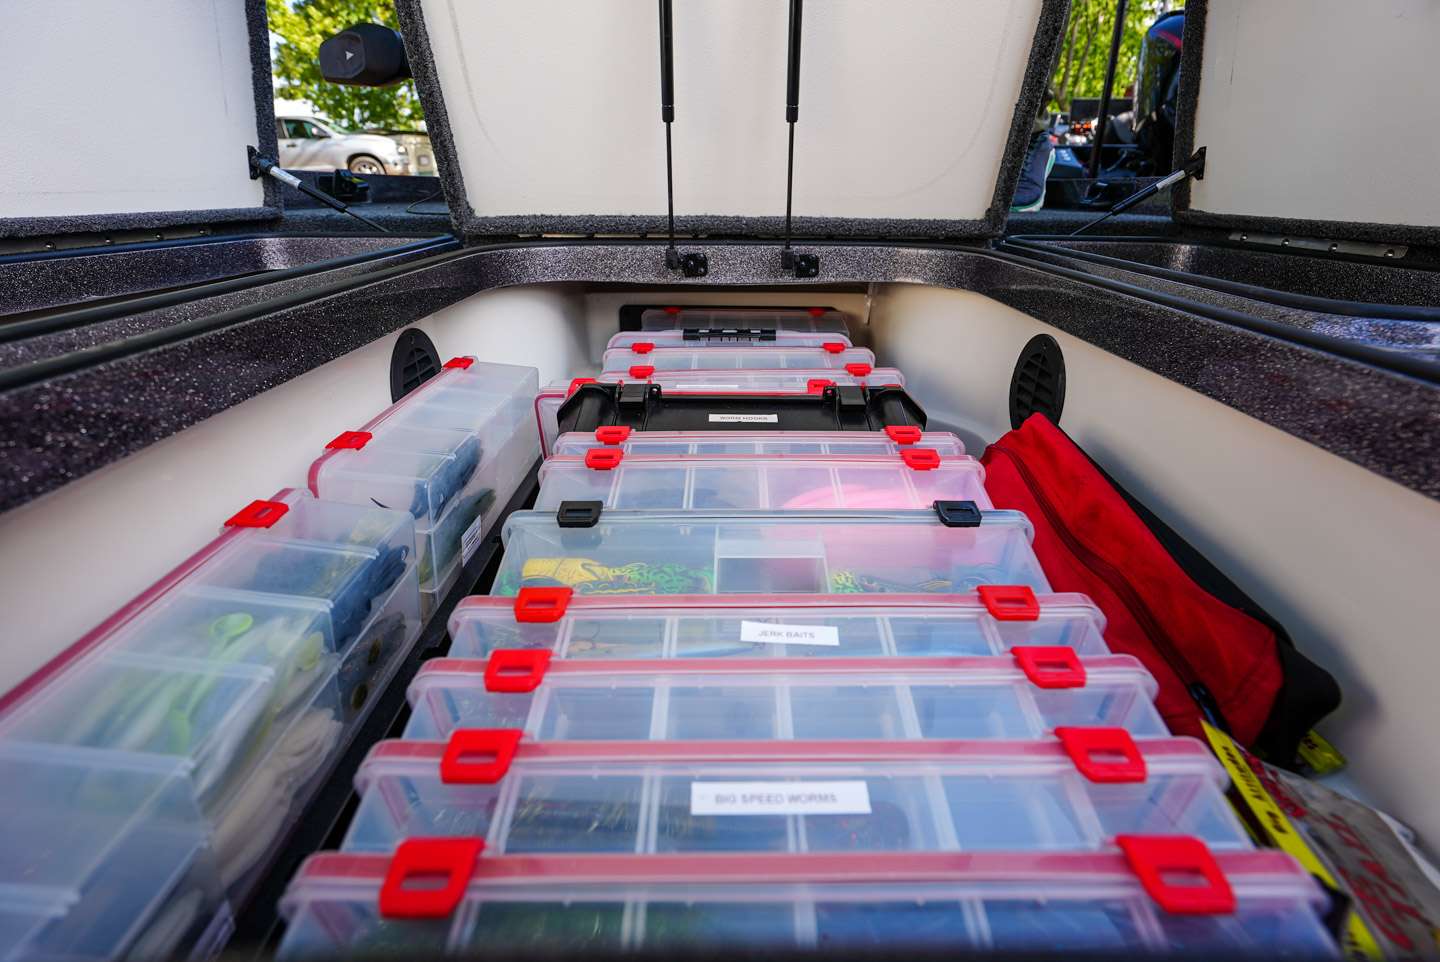 The center compartment is home to a plethora of Bass Mafia tackleboxes.  